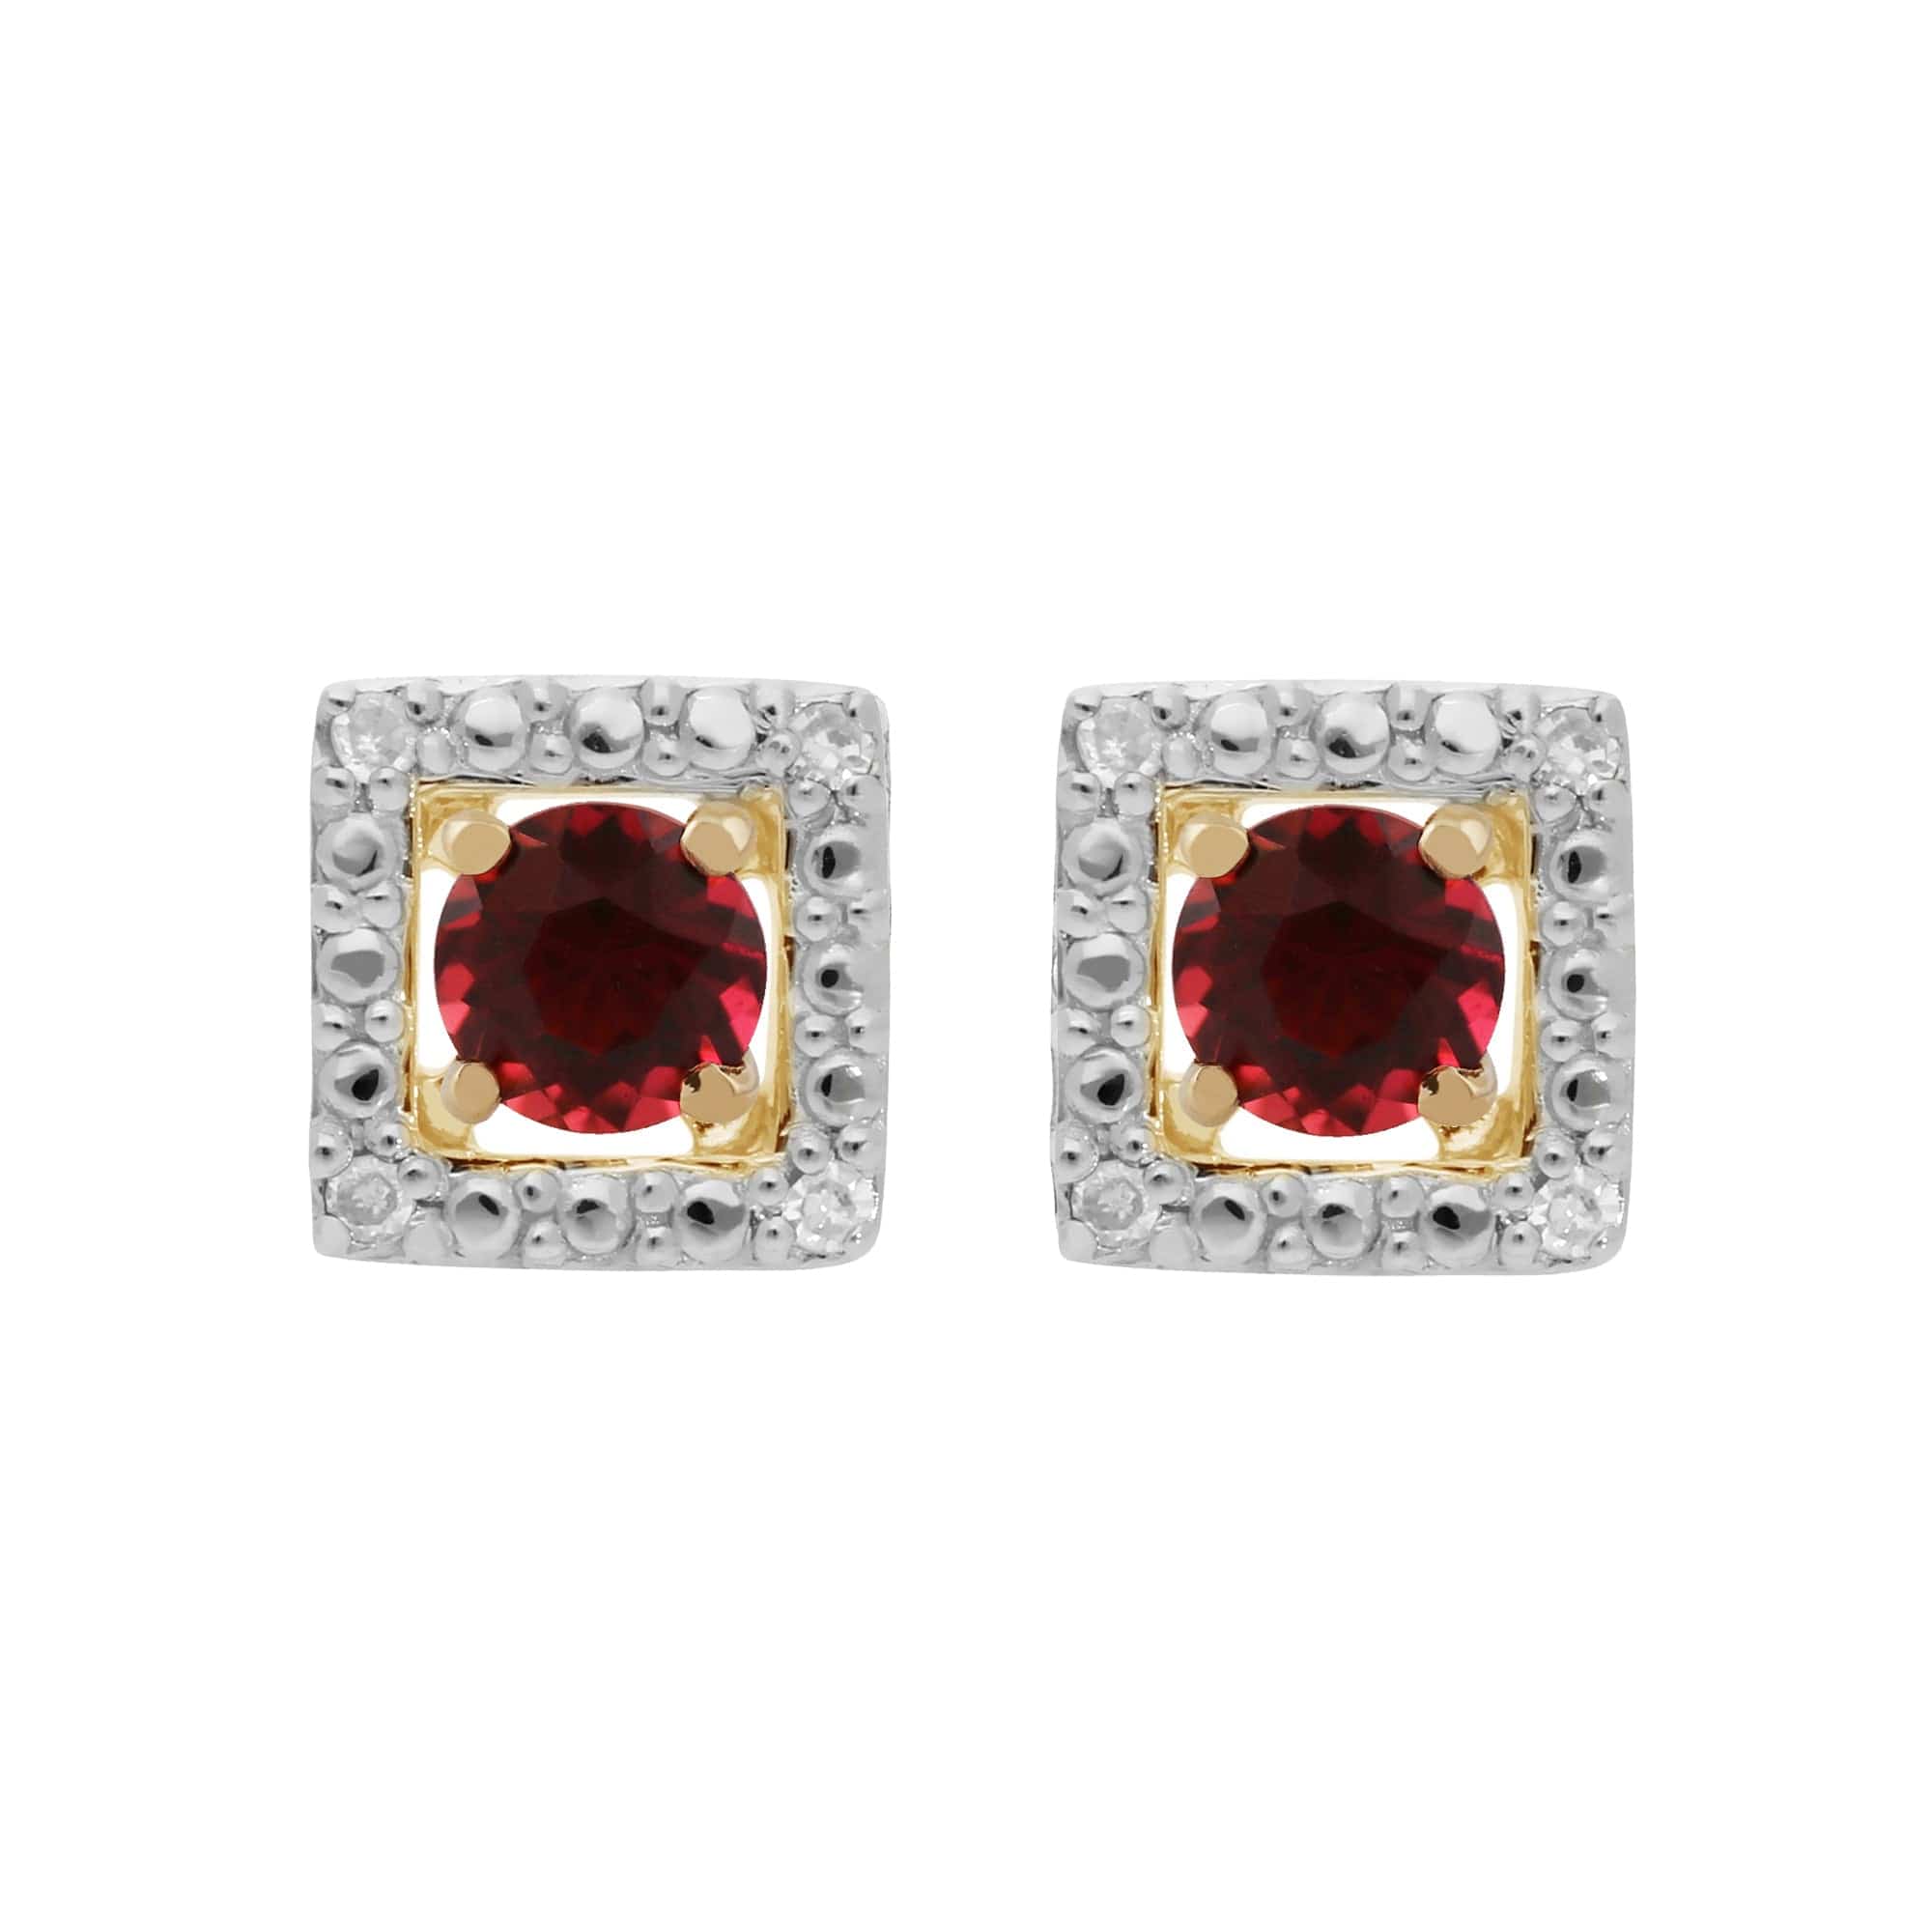 183E0083469-191E0379019 Classic Round Pink Tourmaline Stud Earrings with Detachable Diamond Square Earrings Jacket Set in 9ct Yellow Gold 1